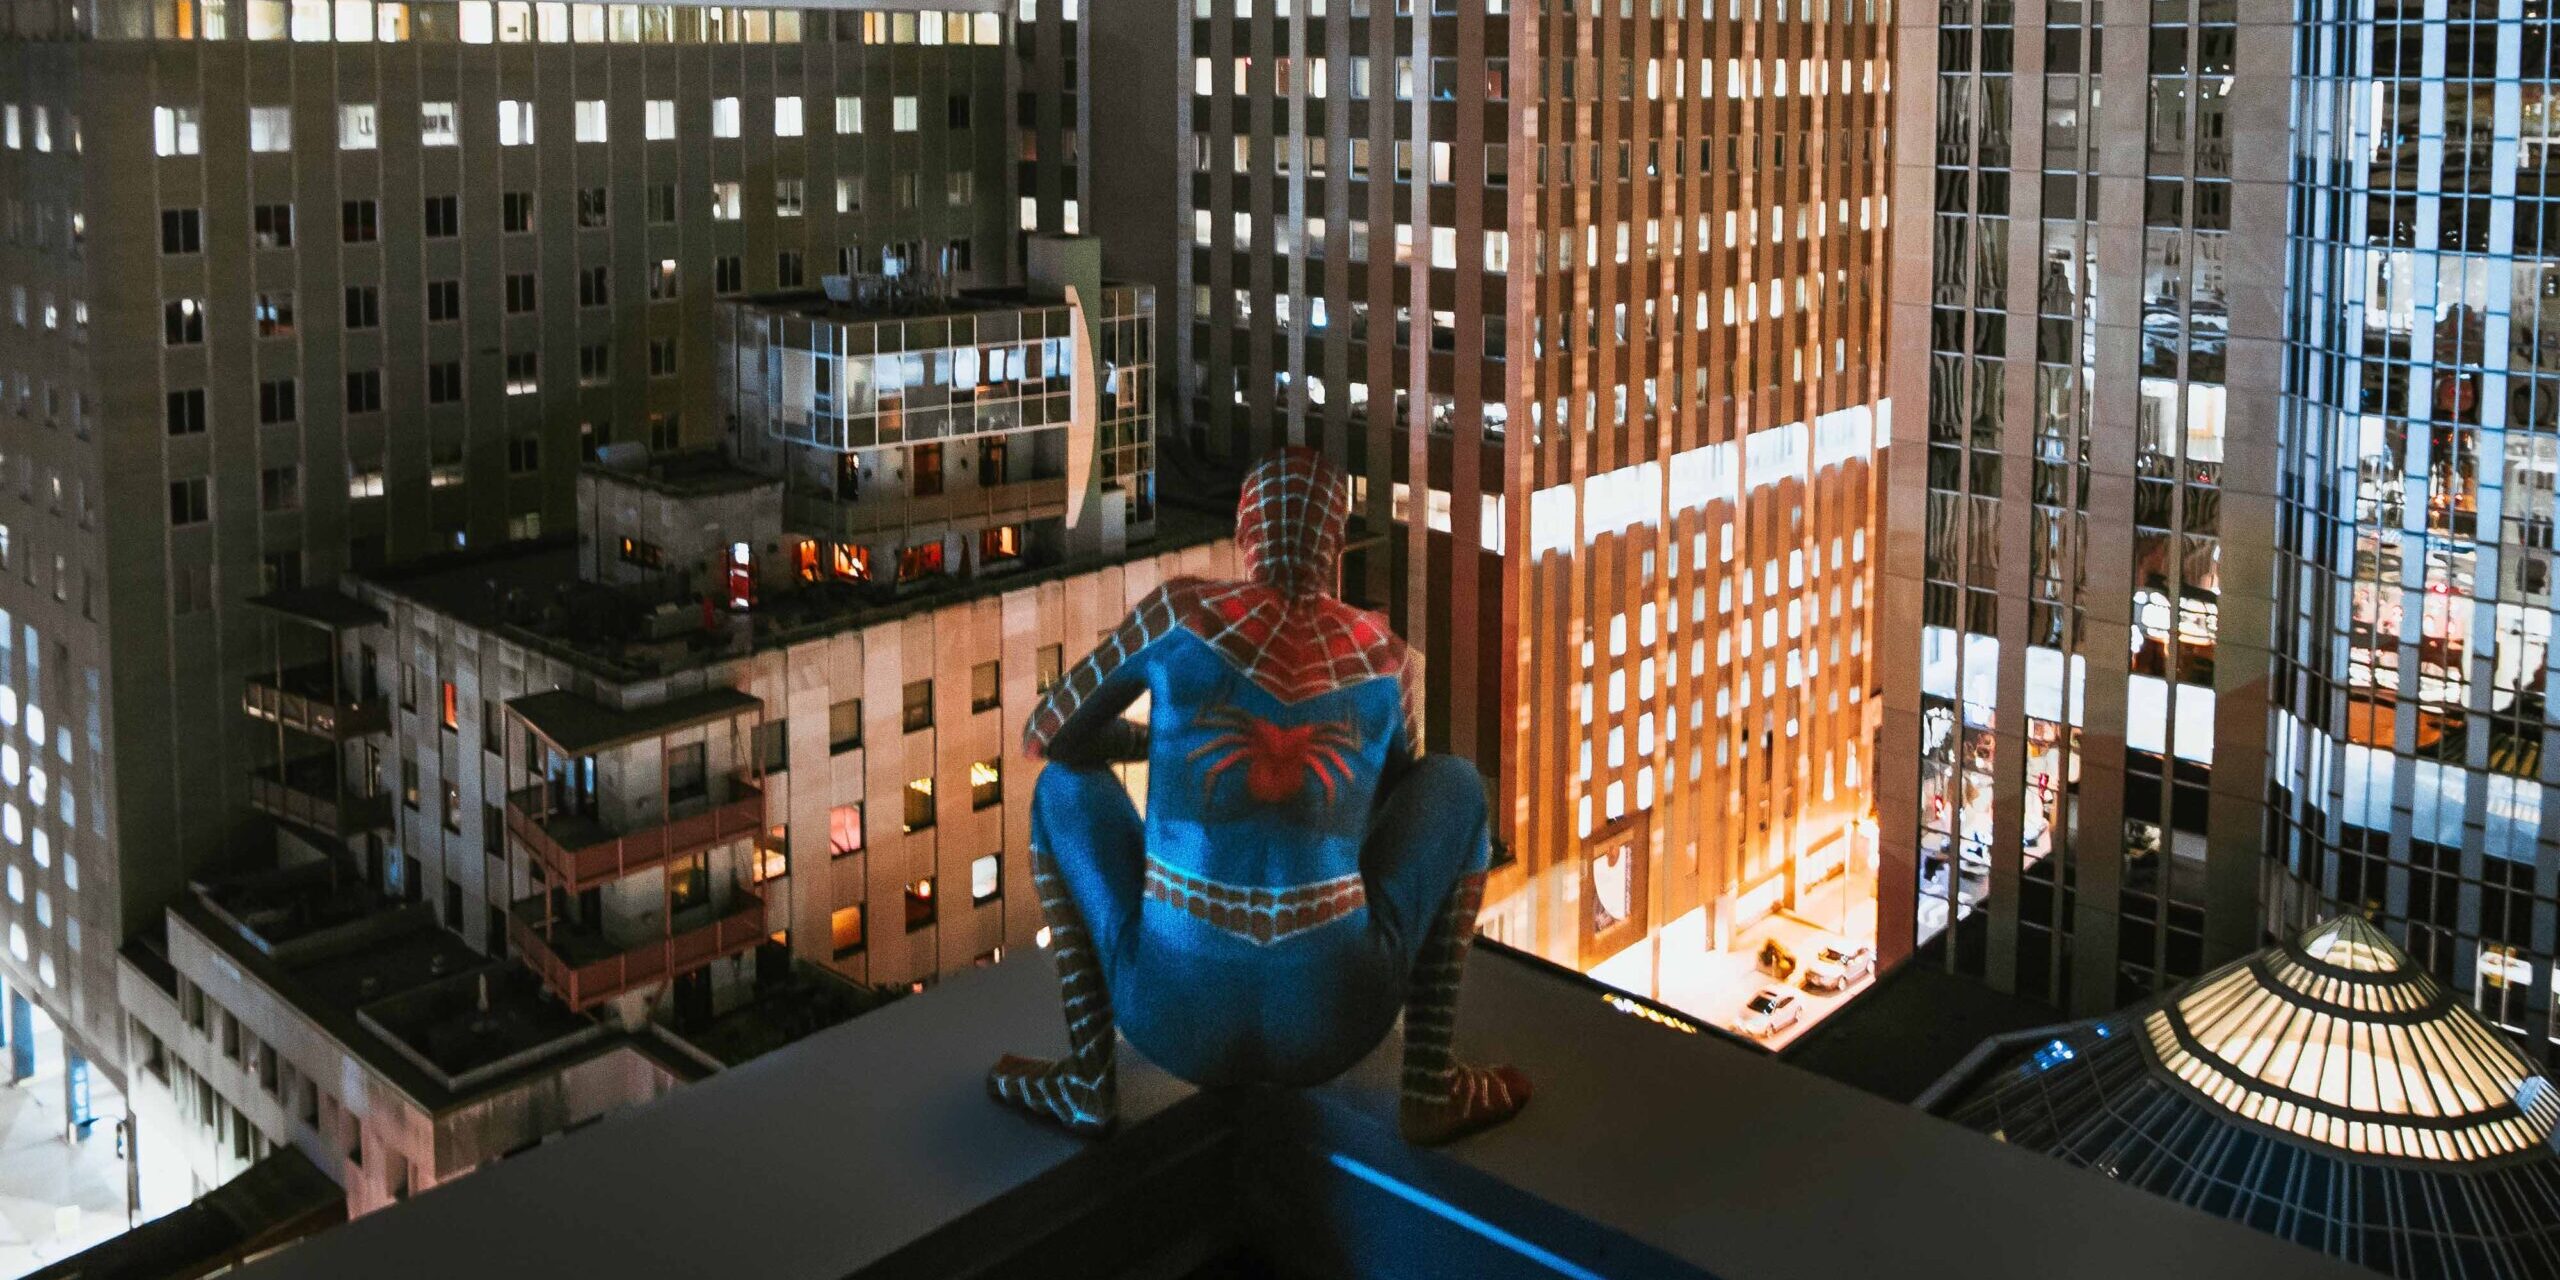 Spiderman on a Roof